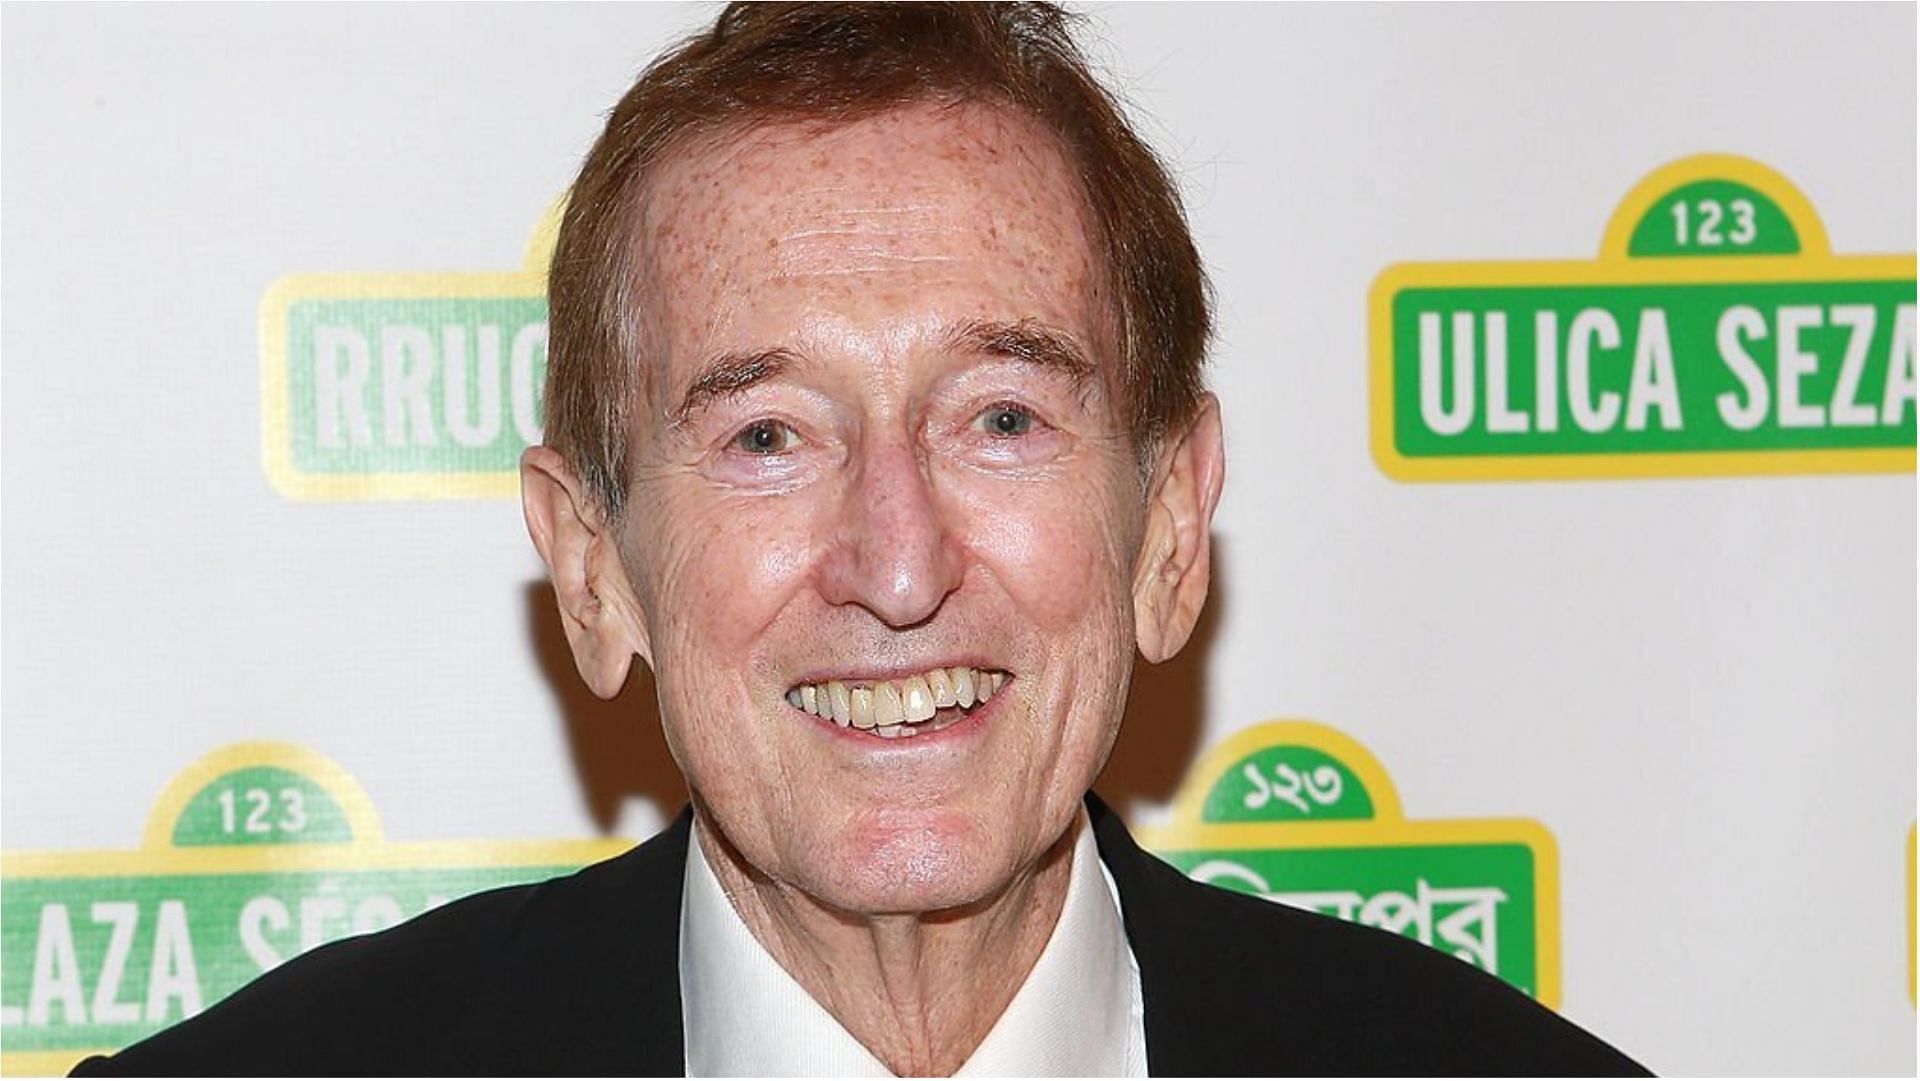 Bob McGrath earned a lot from his career as an actor, musician and author (Image via Robin Marchant/Getty Images)